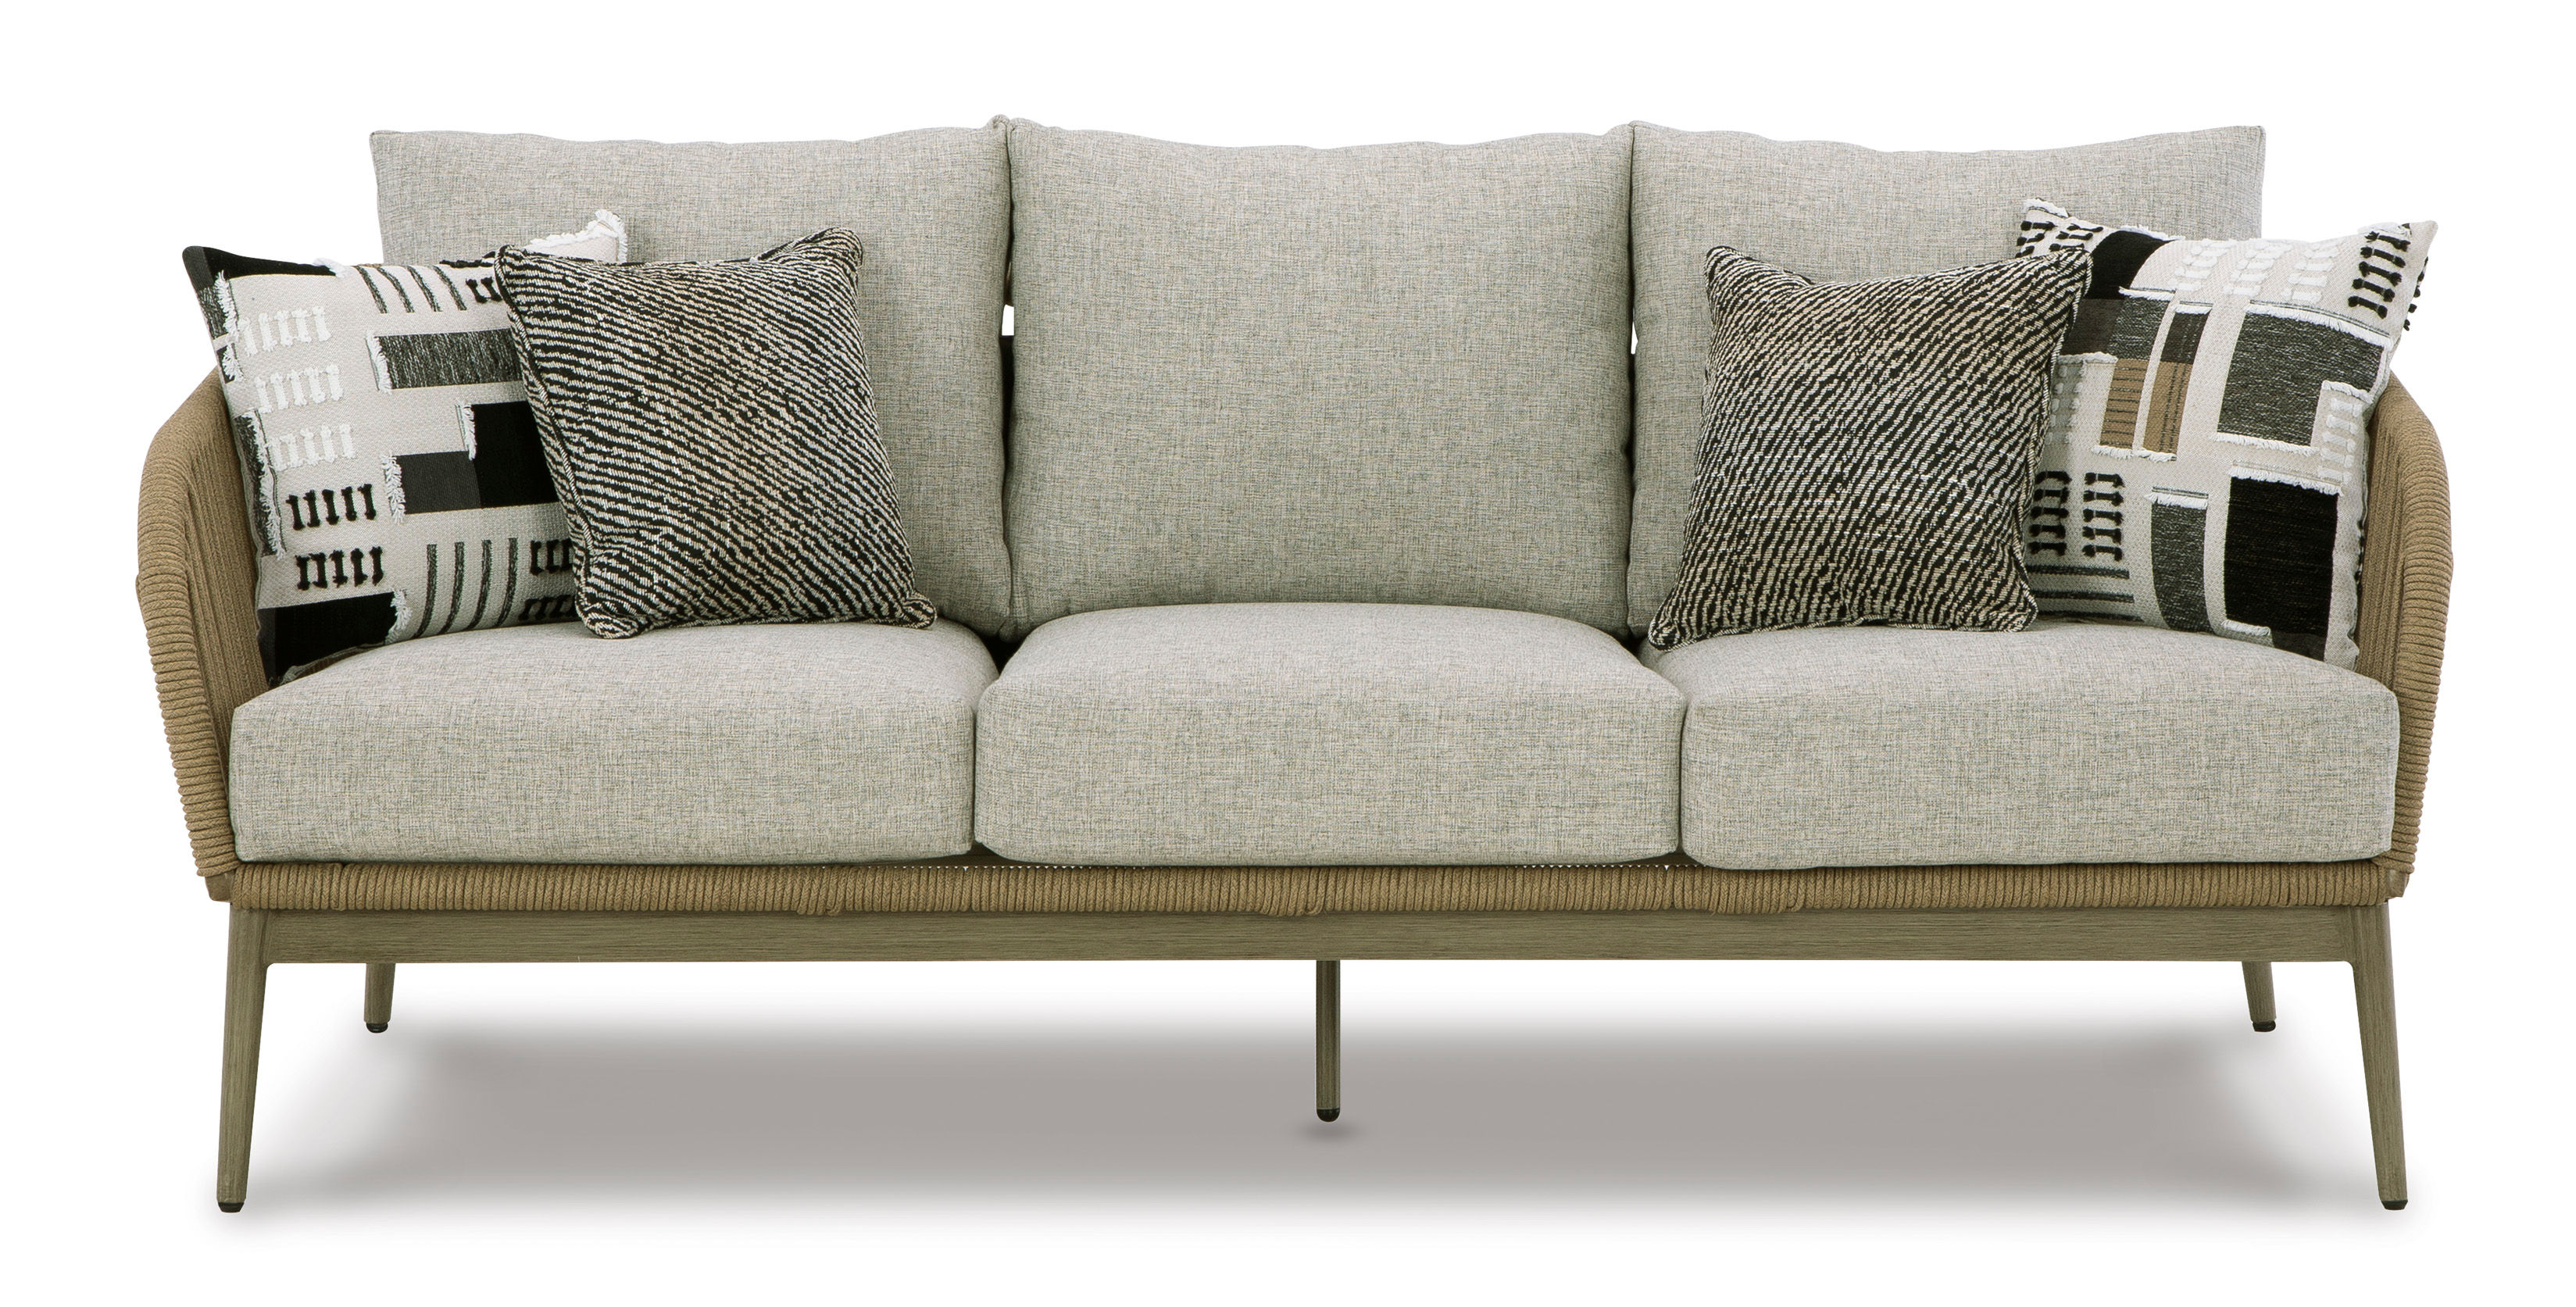 Picture of Swiss Valley Sofa